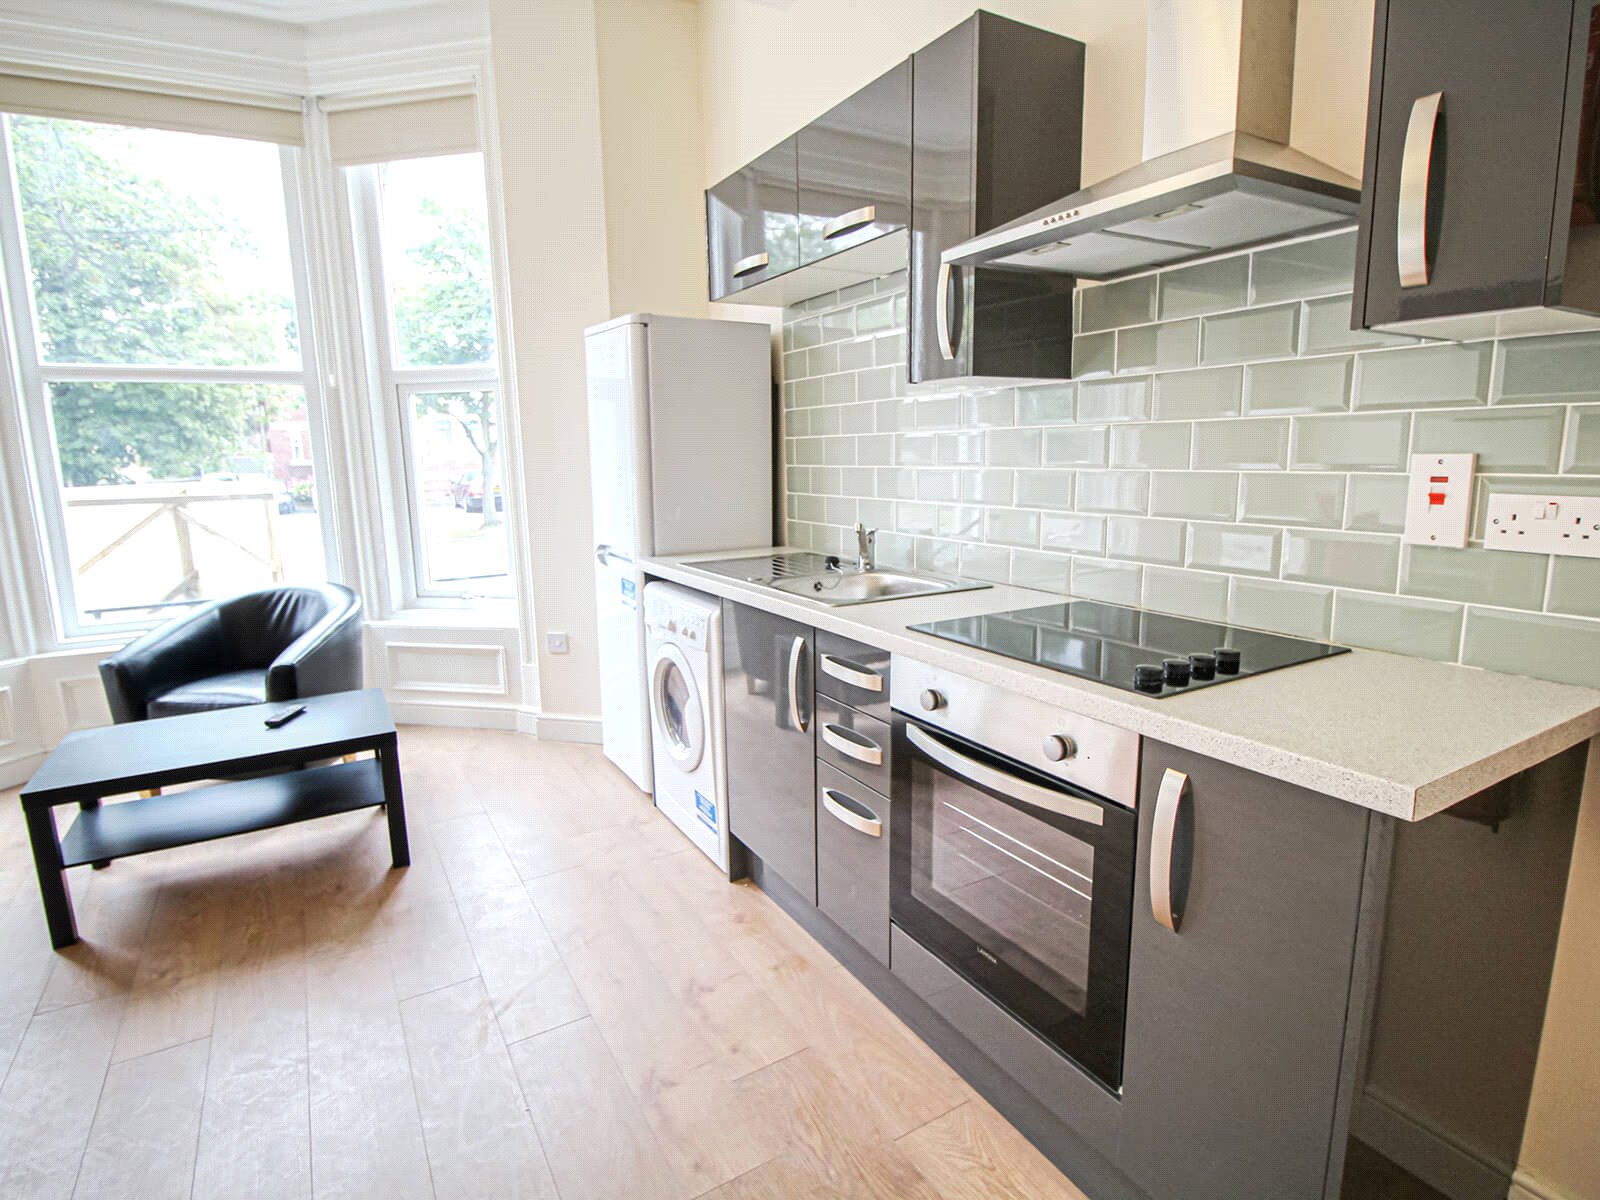 0 bed apartment for rent in Harrogate. From YPP - Leeds